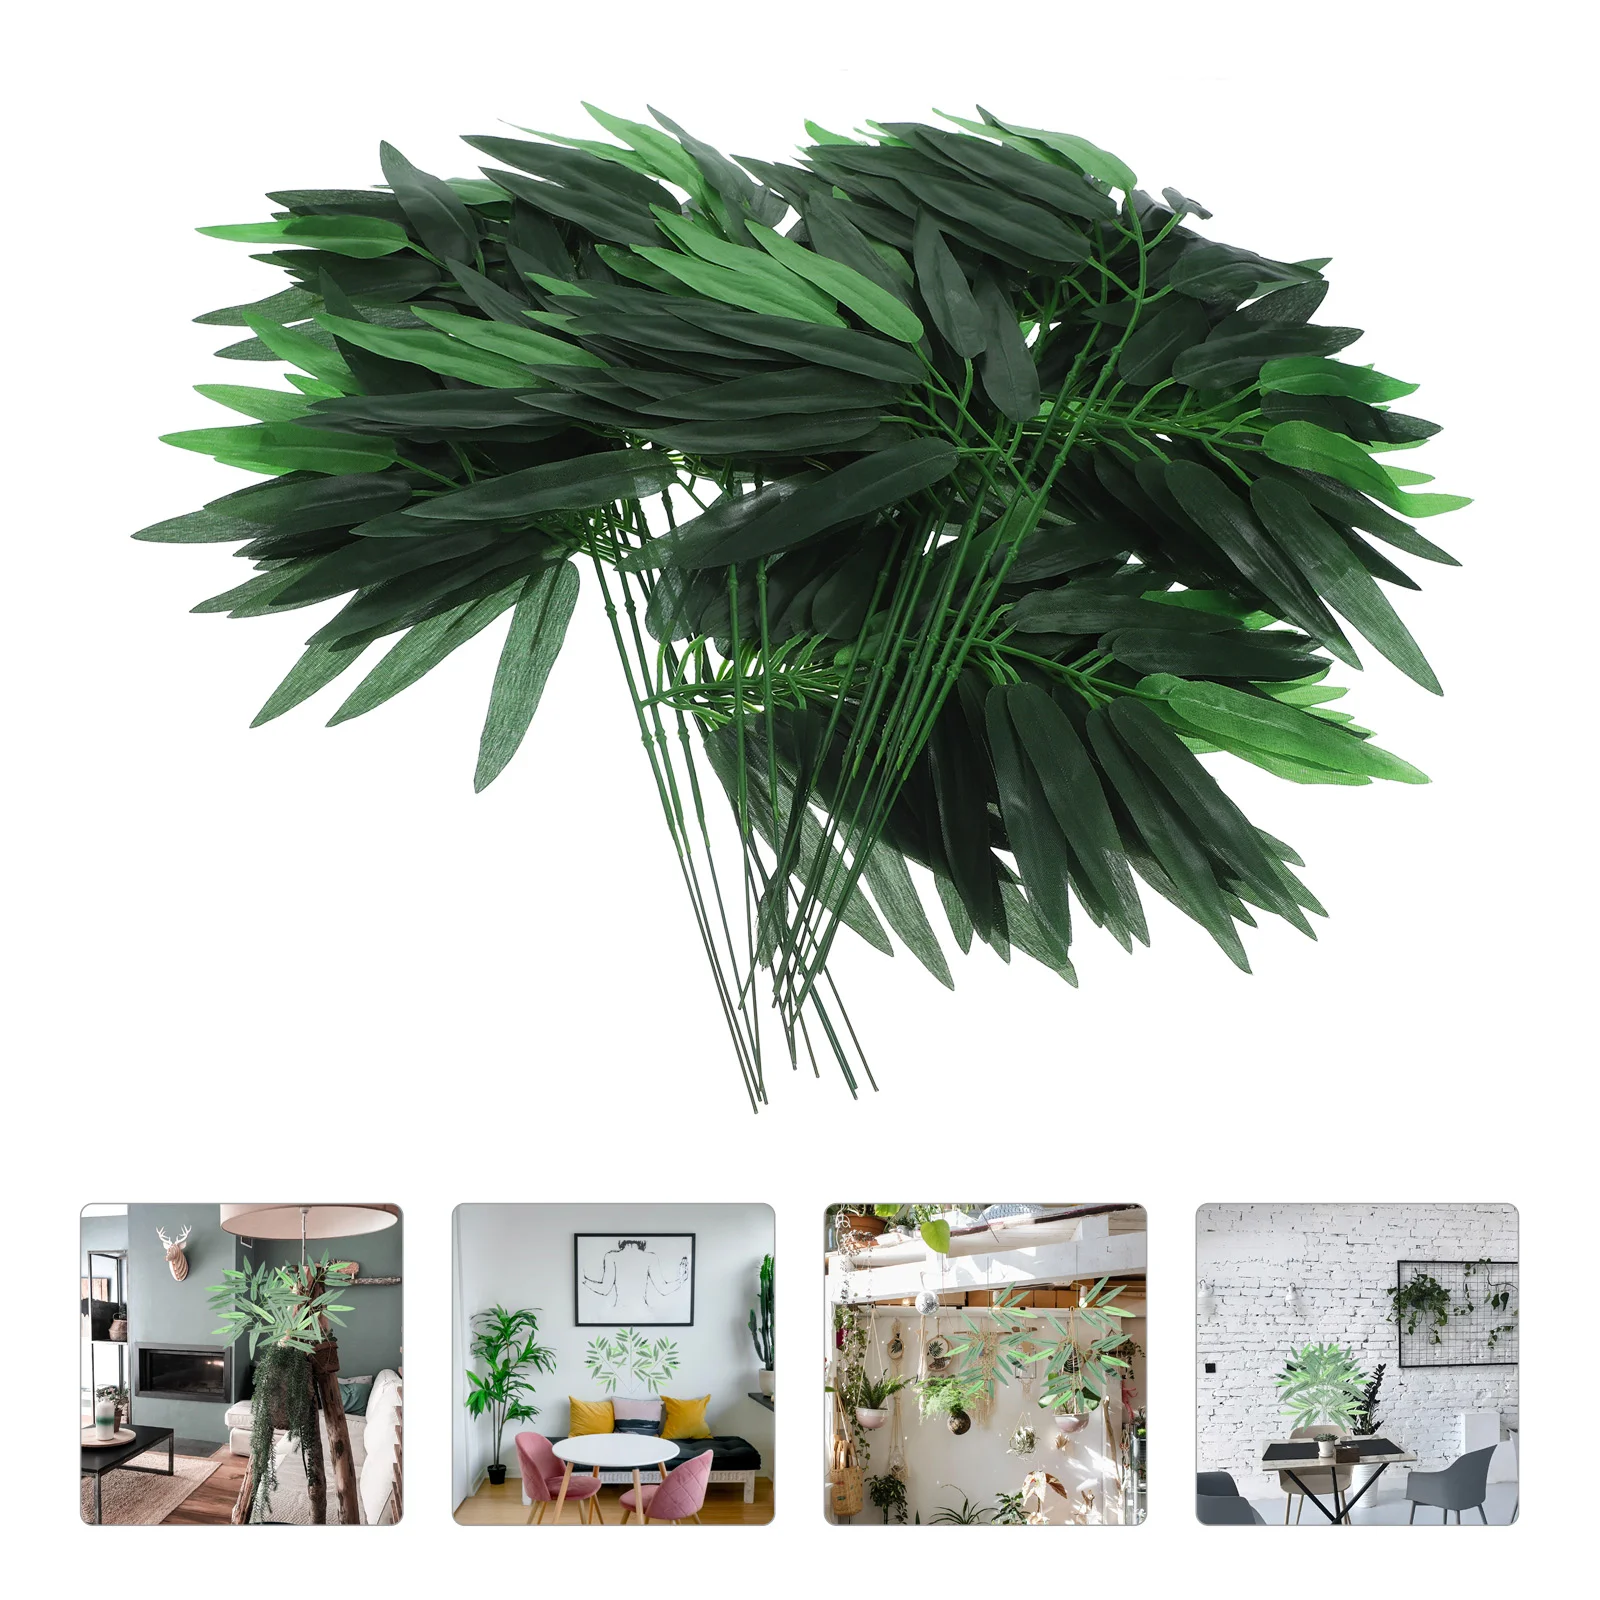 

50pcs Leaves Artificial Green Leaves Stem Plants Branch Greenery Leaves Spray for Wedding Decoration Home The bamboo leaf